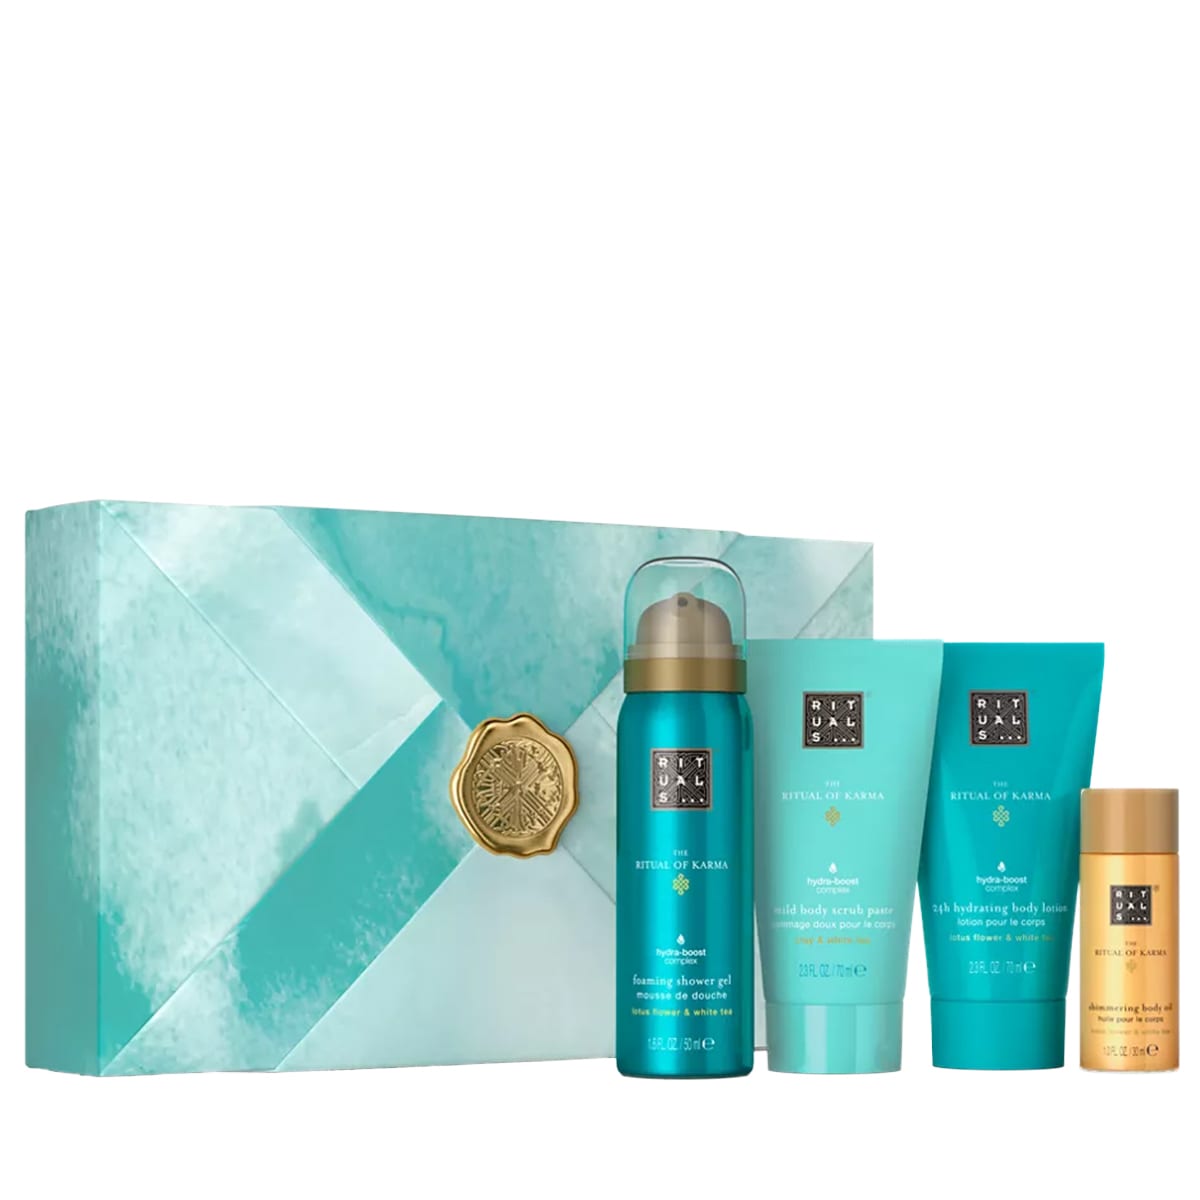 Buy Rituals The Ritual of Karma Body Care Set online at a great price